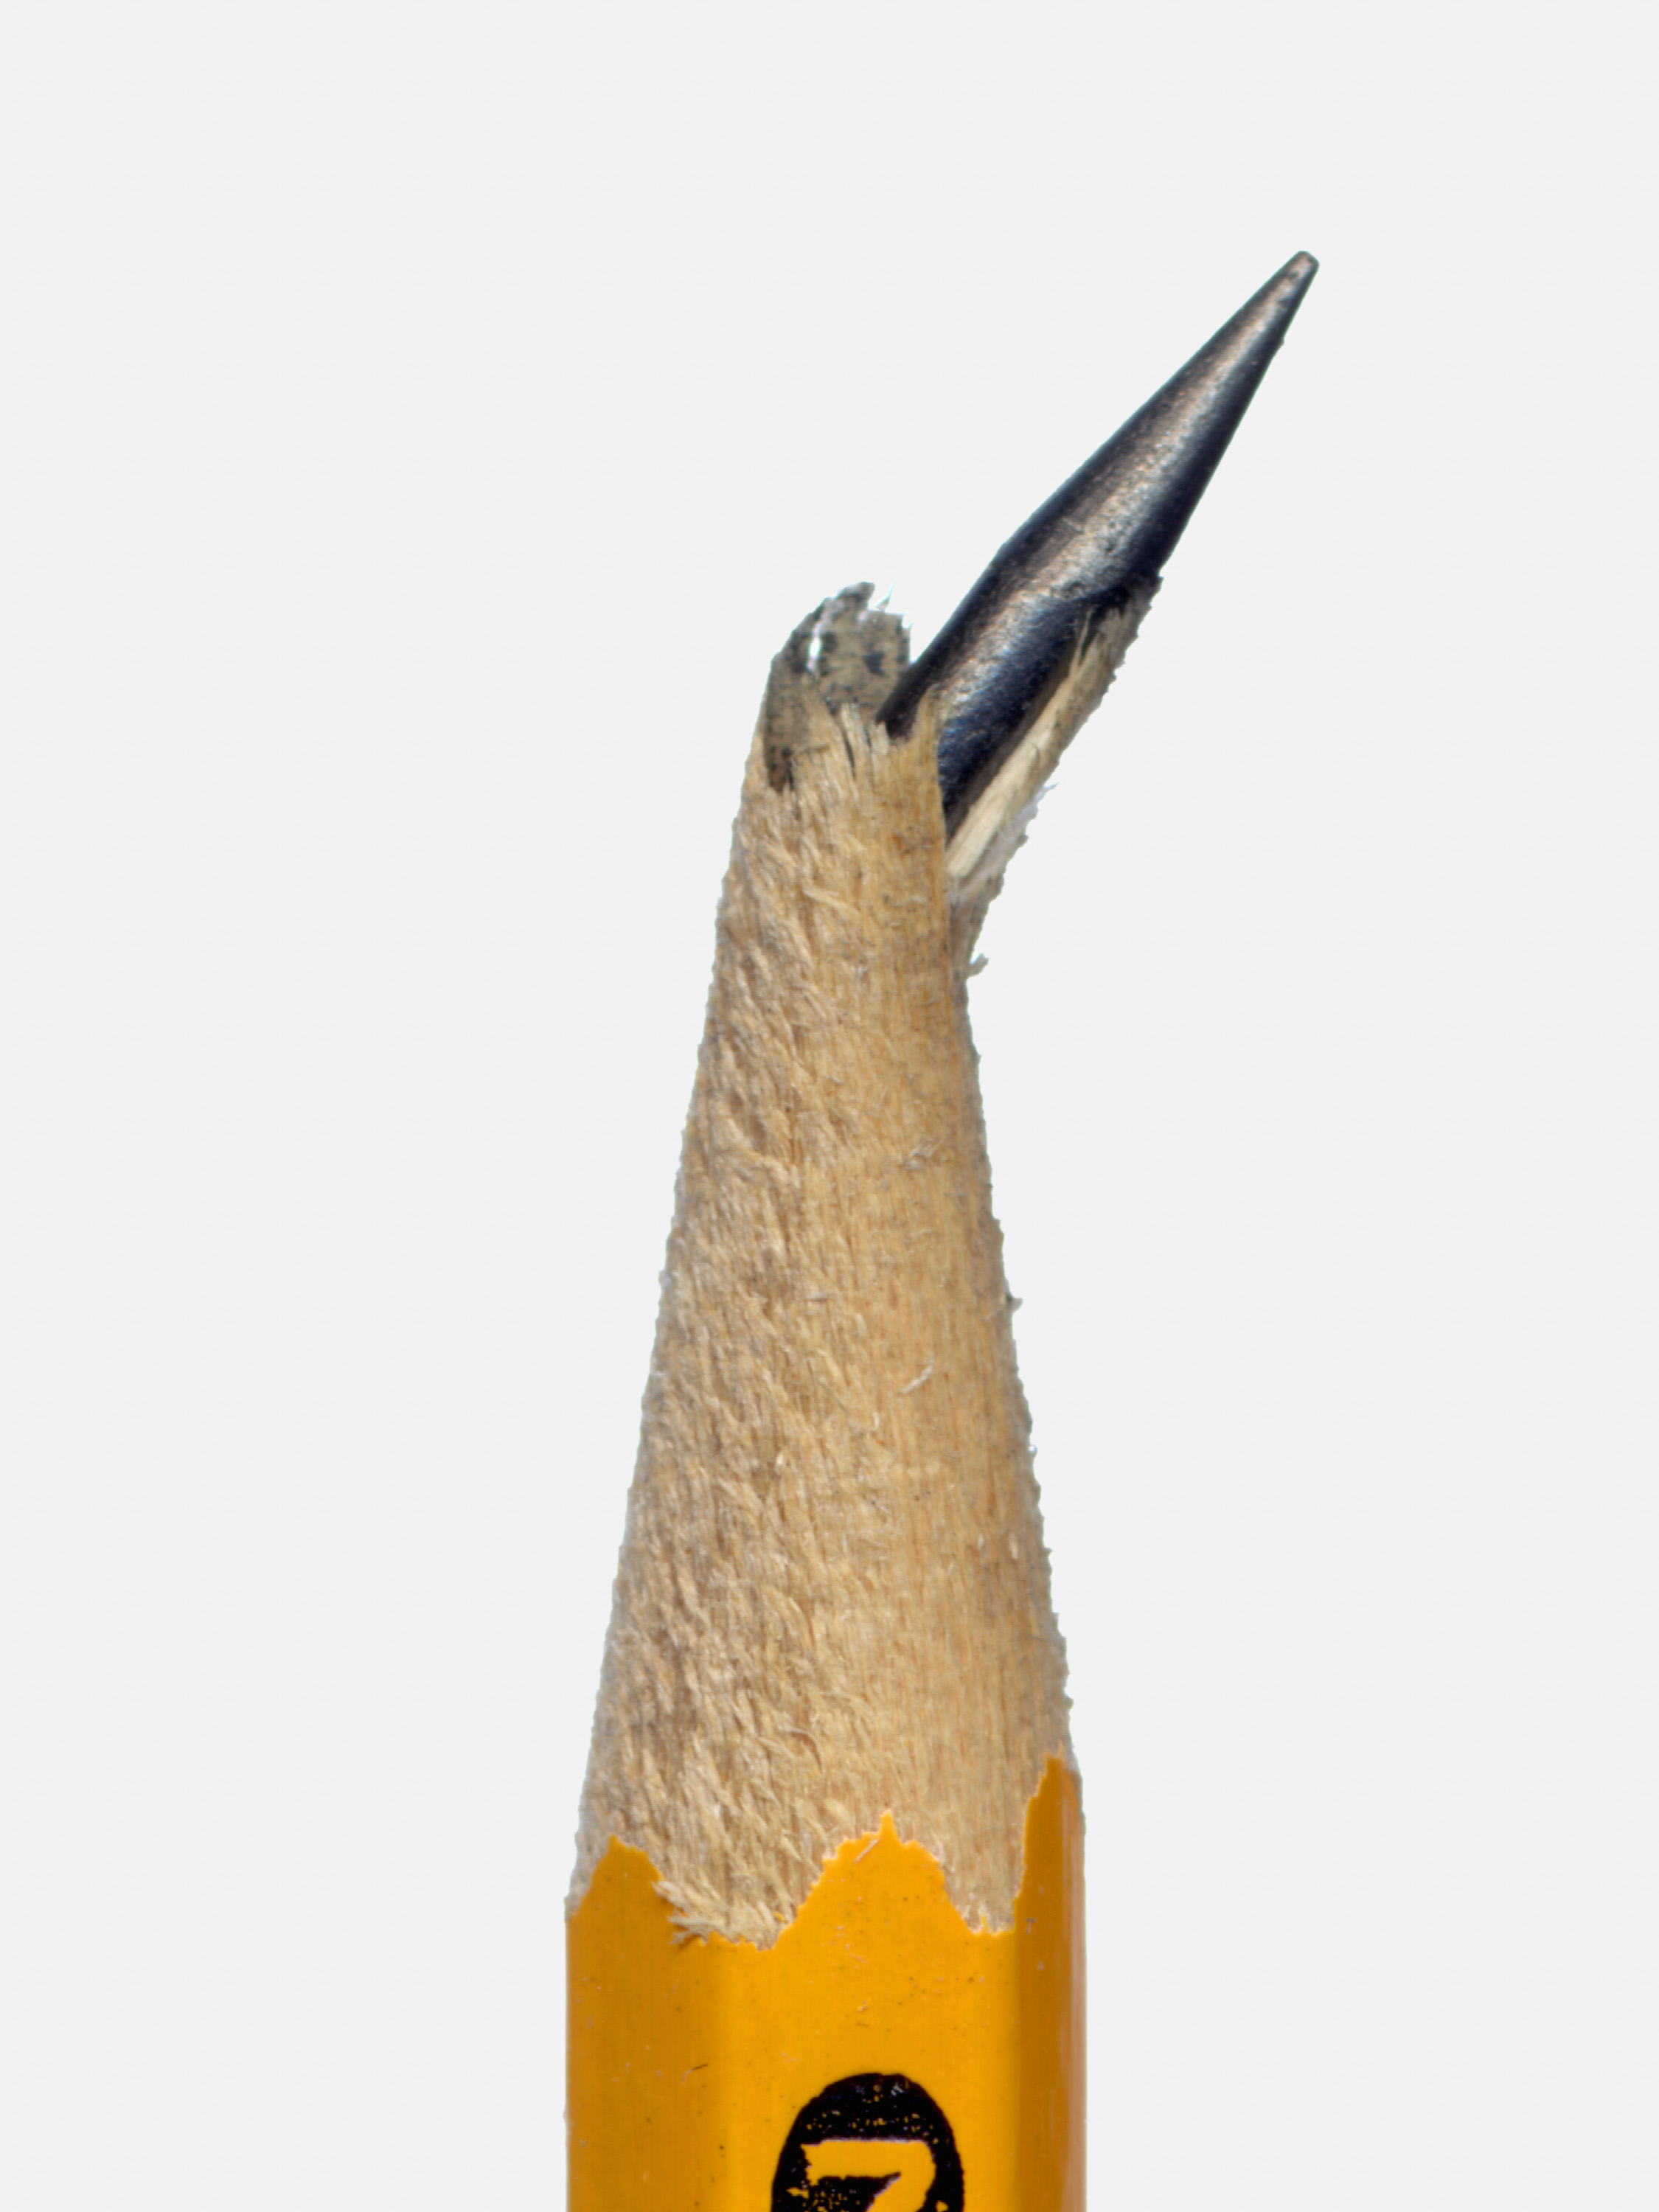 a yellow graphite pencil with the tip broken and tilting sharply askew